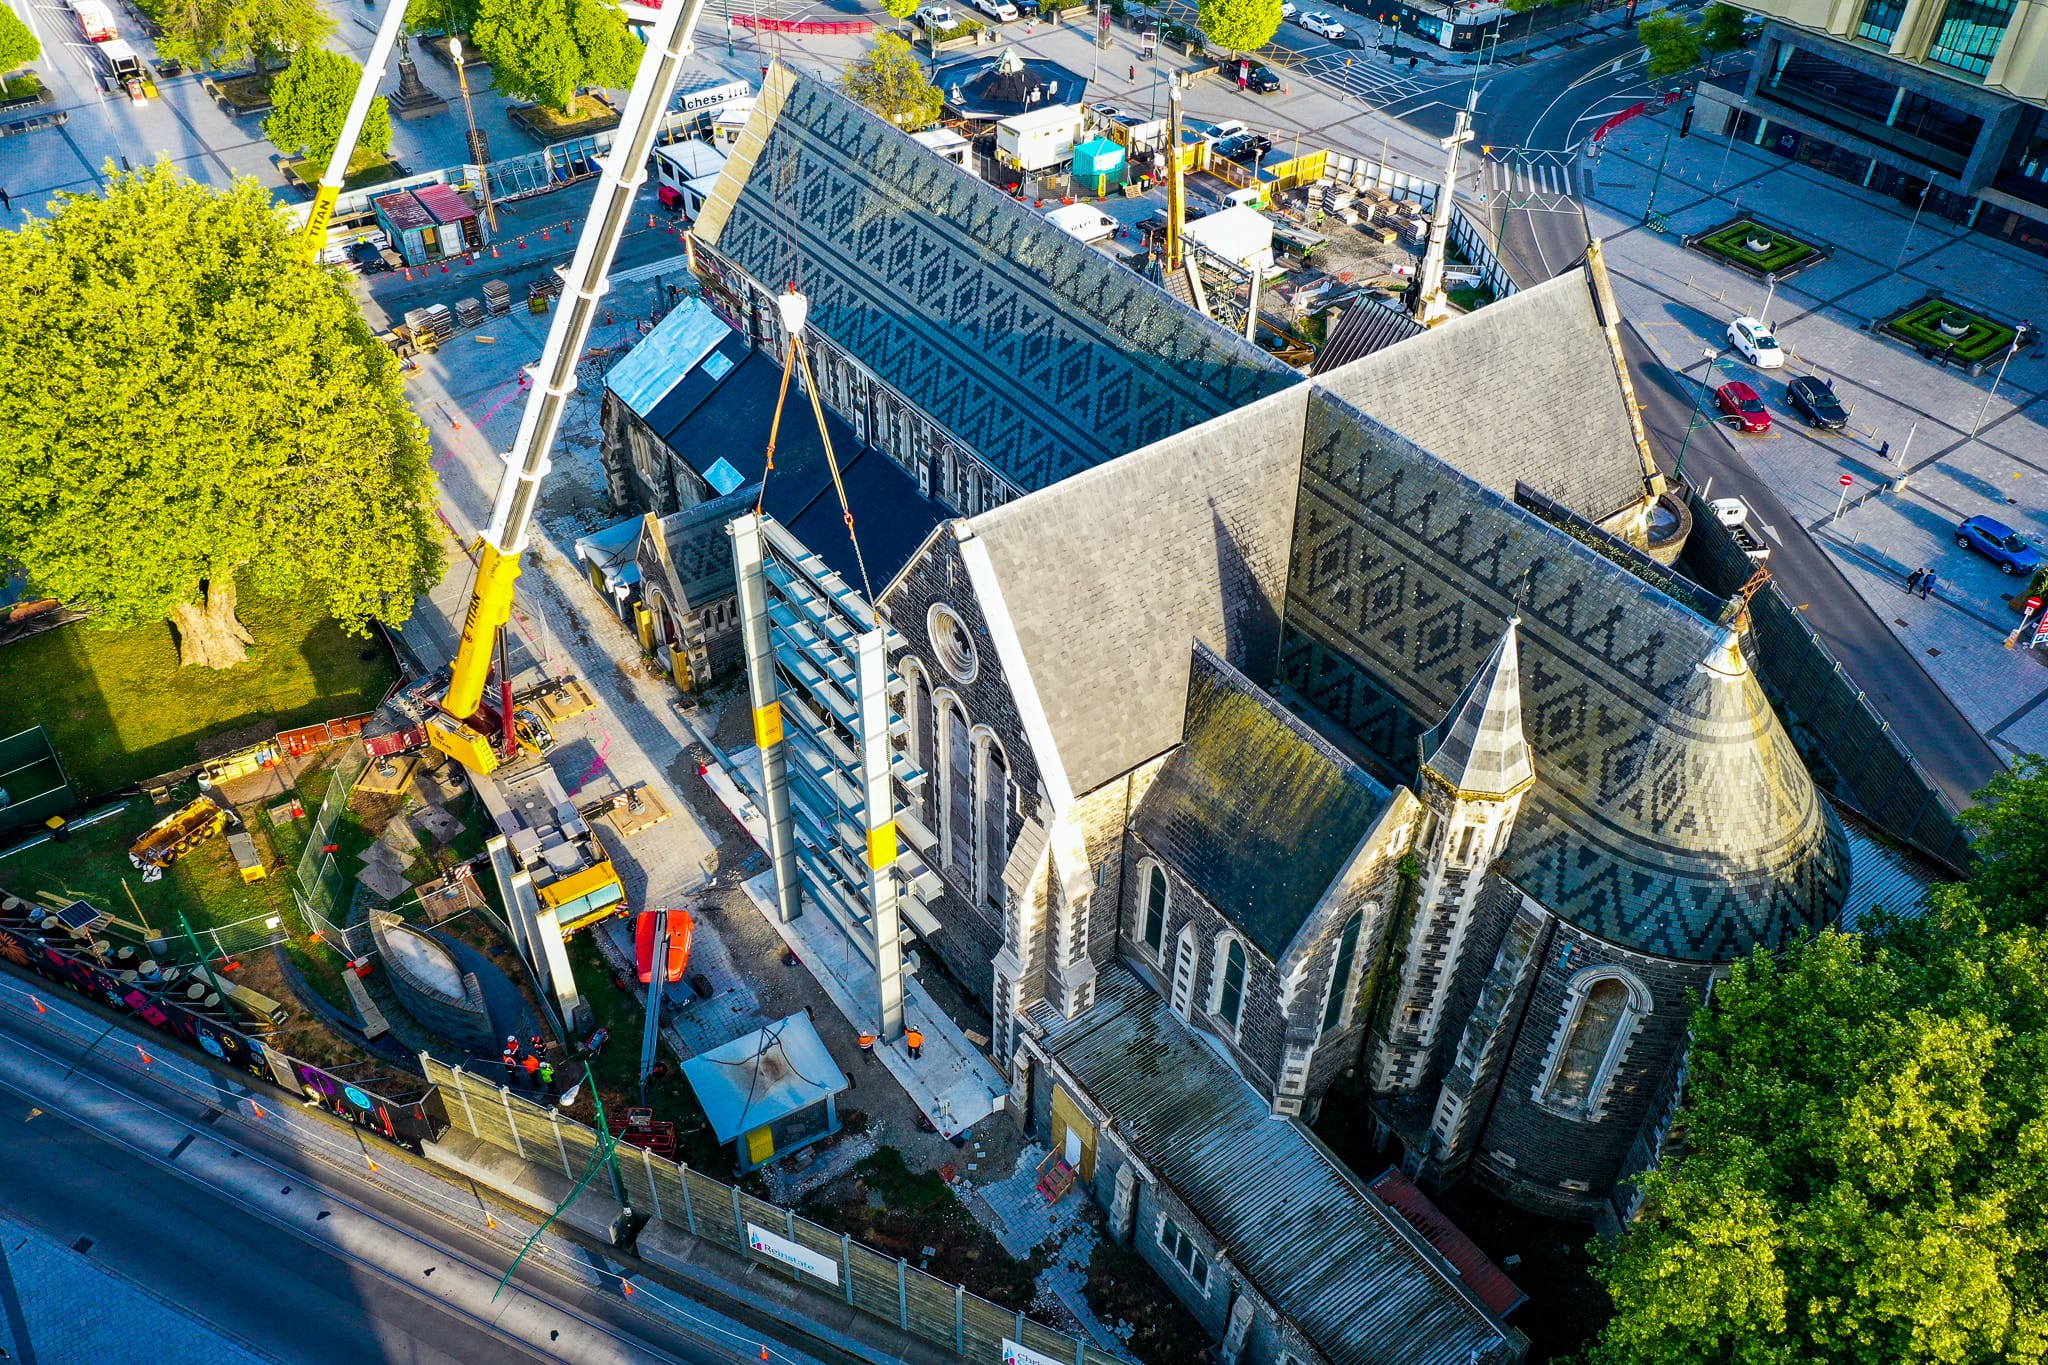 vip_steel_christchurch_cathedral_south_wall_frame_23:10:20_small_53